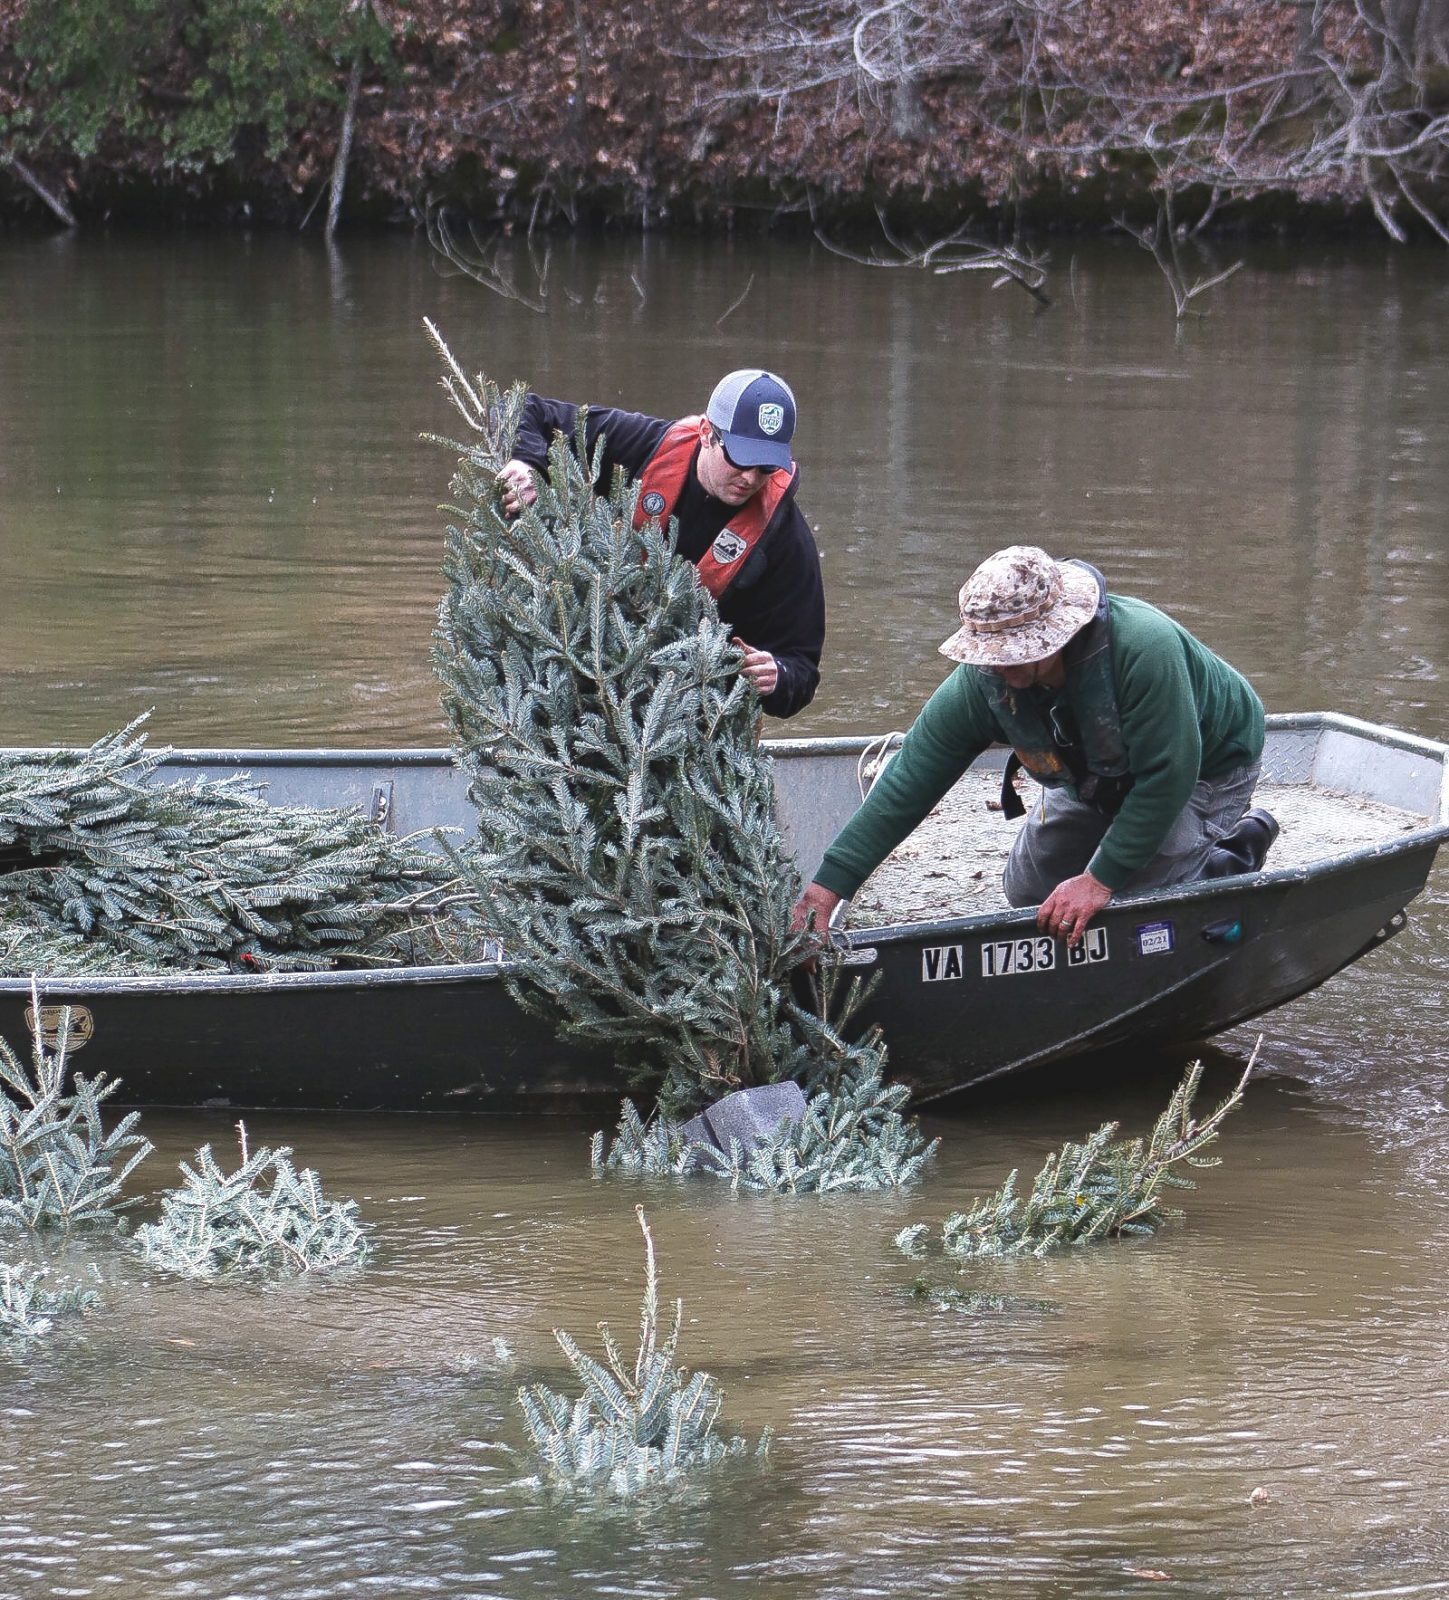 An image of two DWR biologists adding old Christmas trees with cinderblocks on their bottom into a pond to provide natural habitat